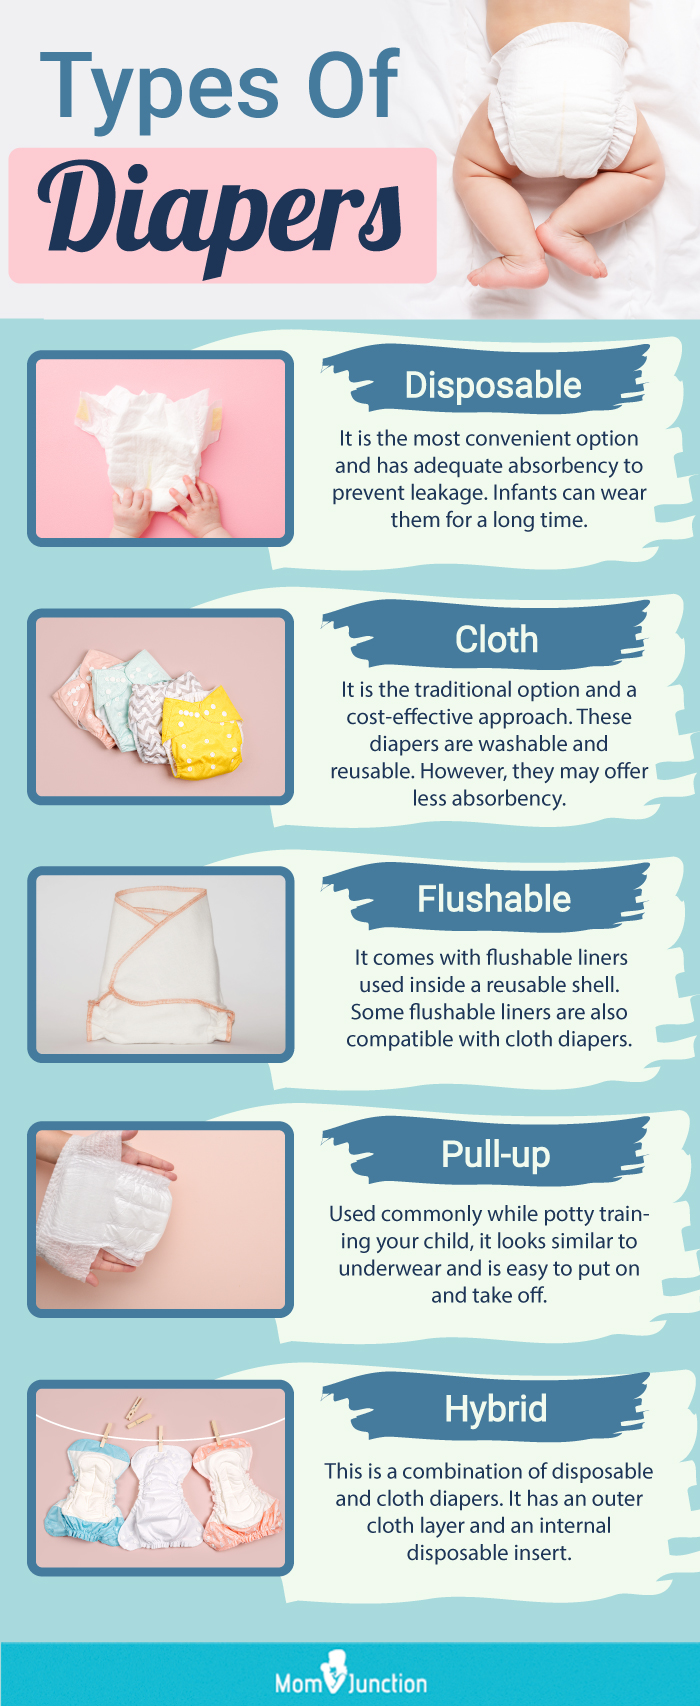 Types Of Diapers (Infographic)